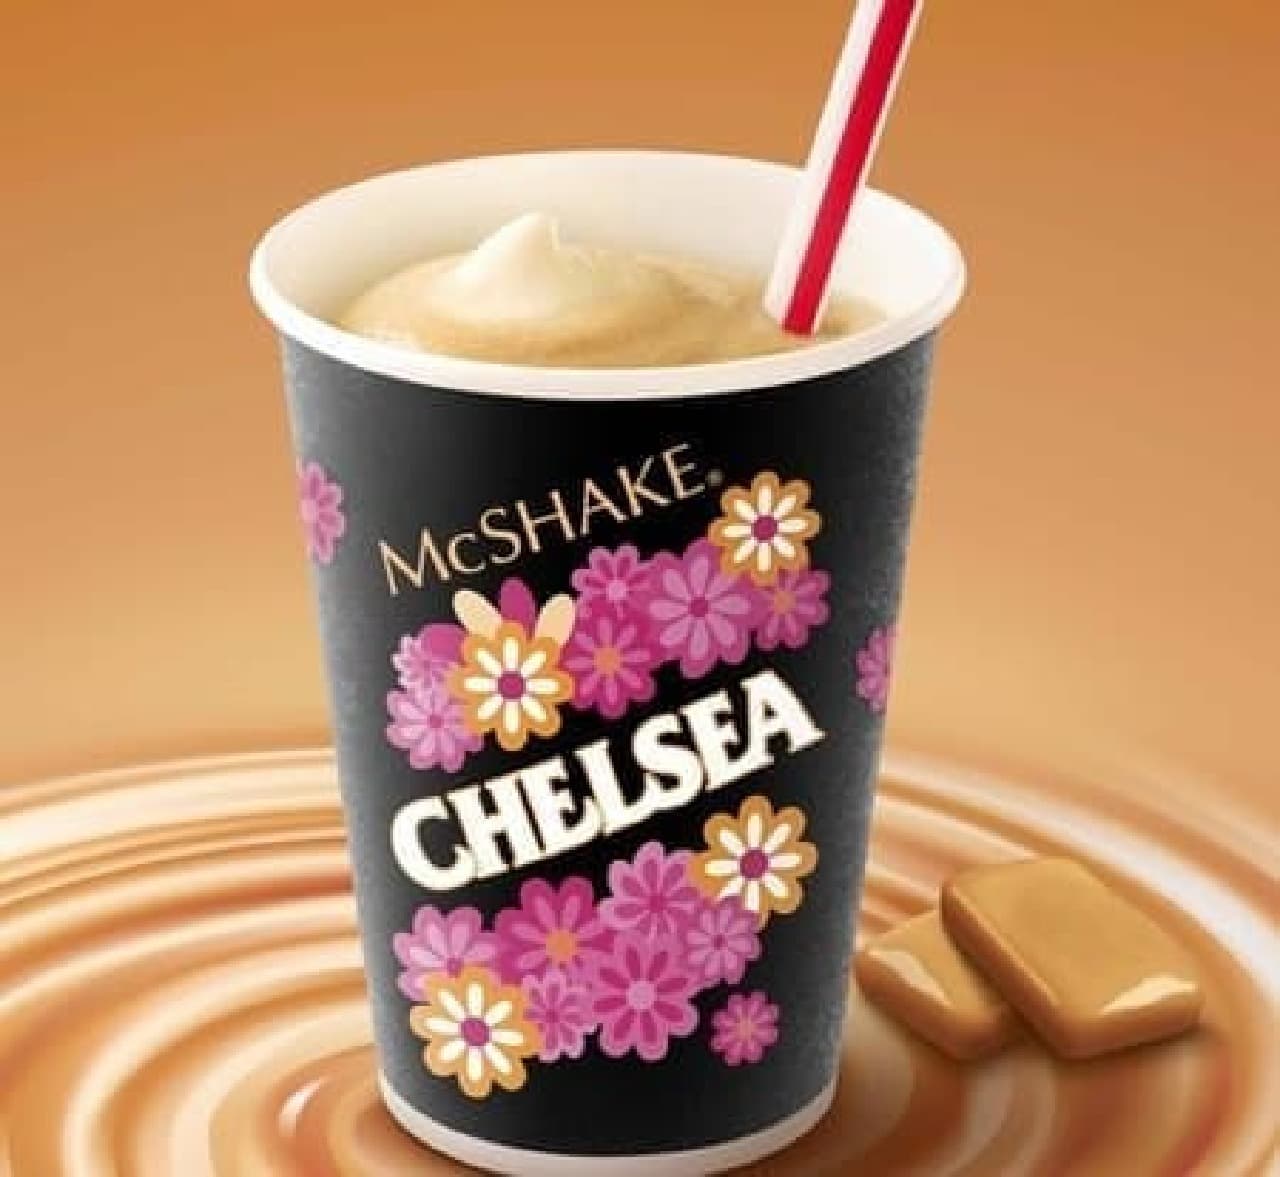 McShake Chelsea is a shake that uses syrup containing "Chelsea butterscotch" dissolved in "McShake".